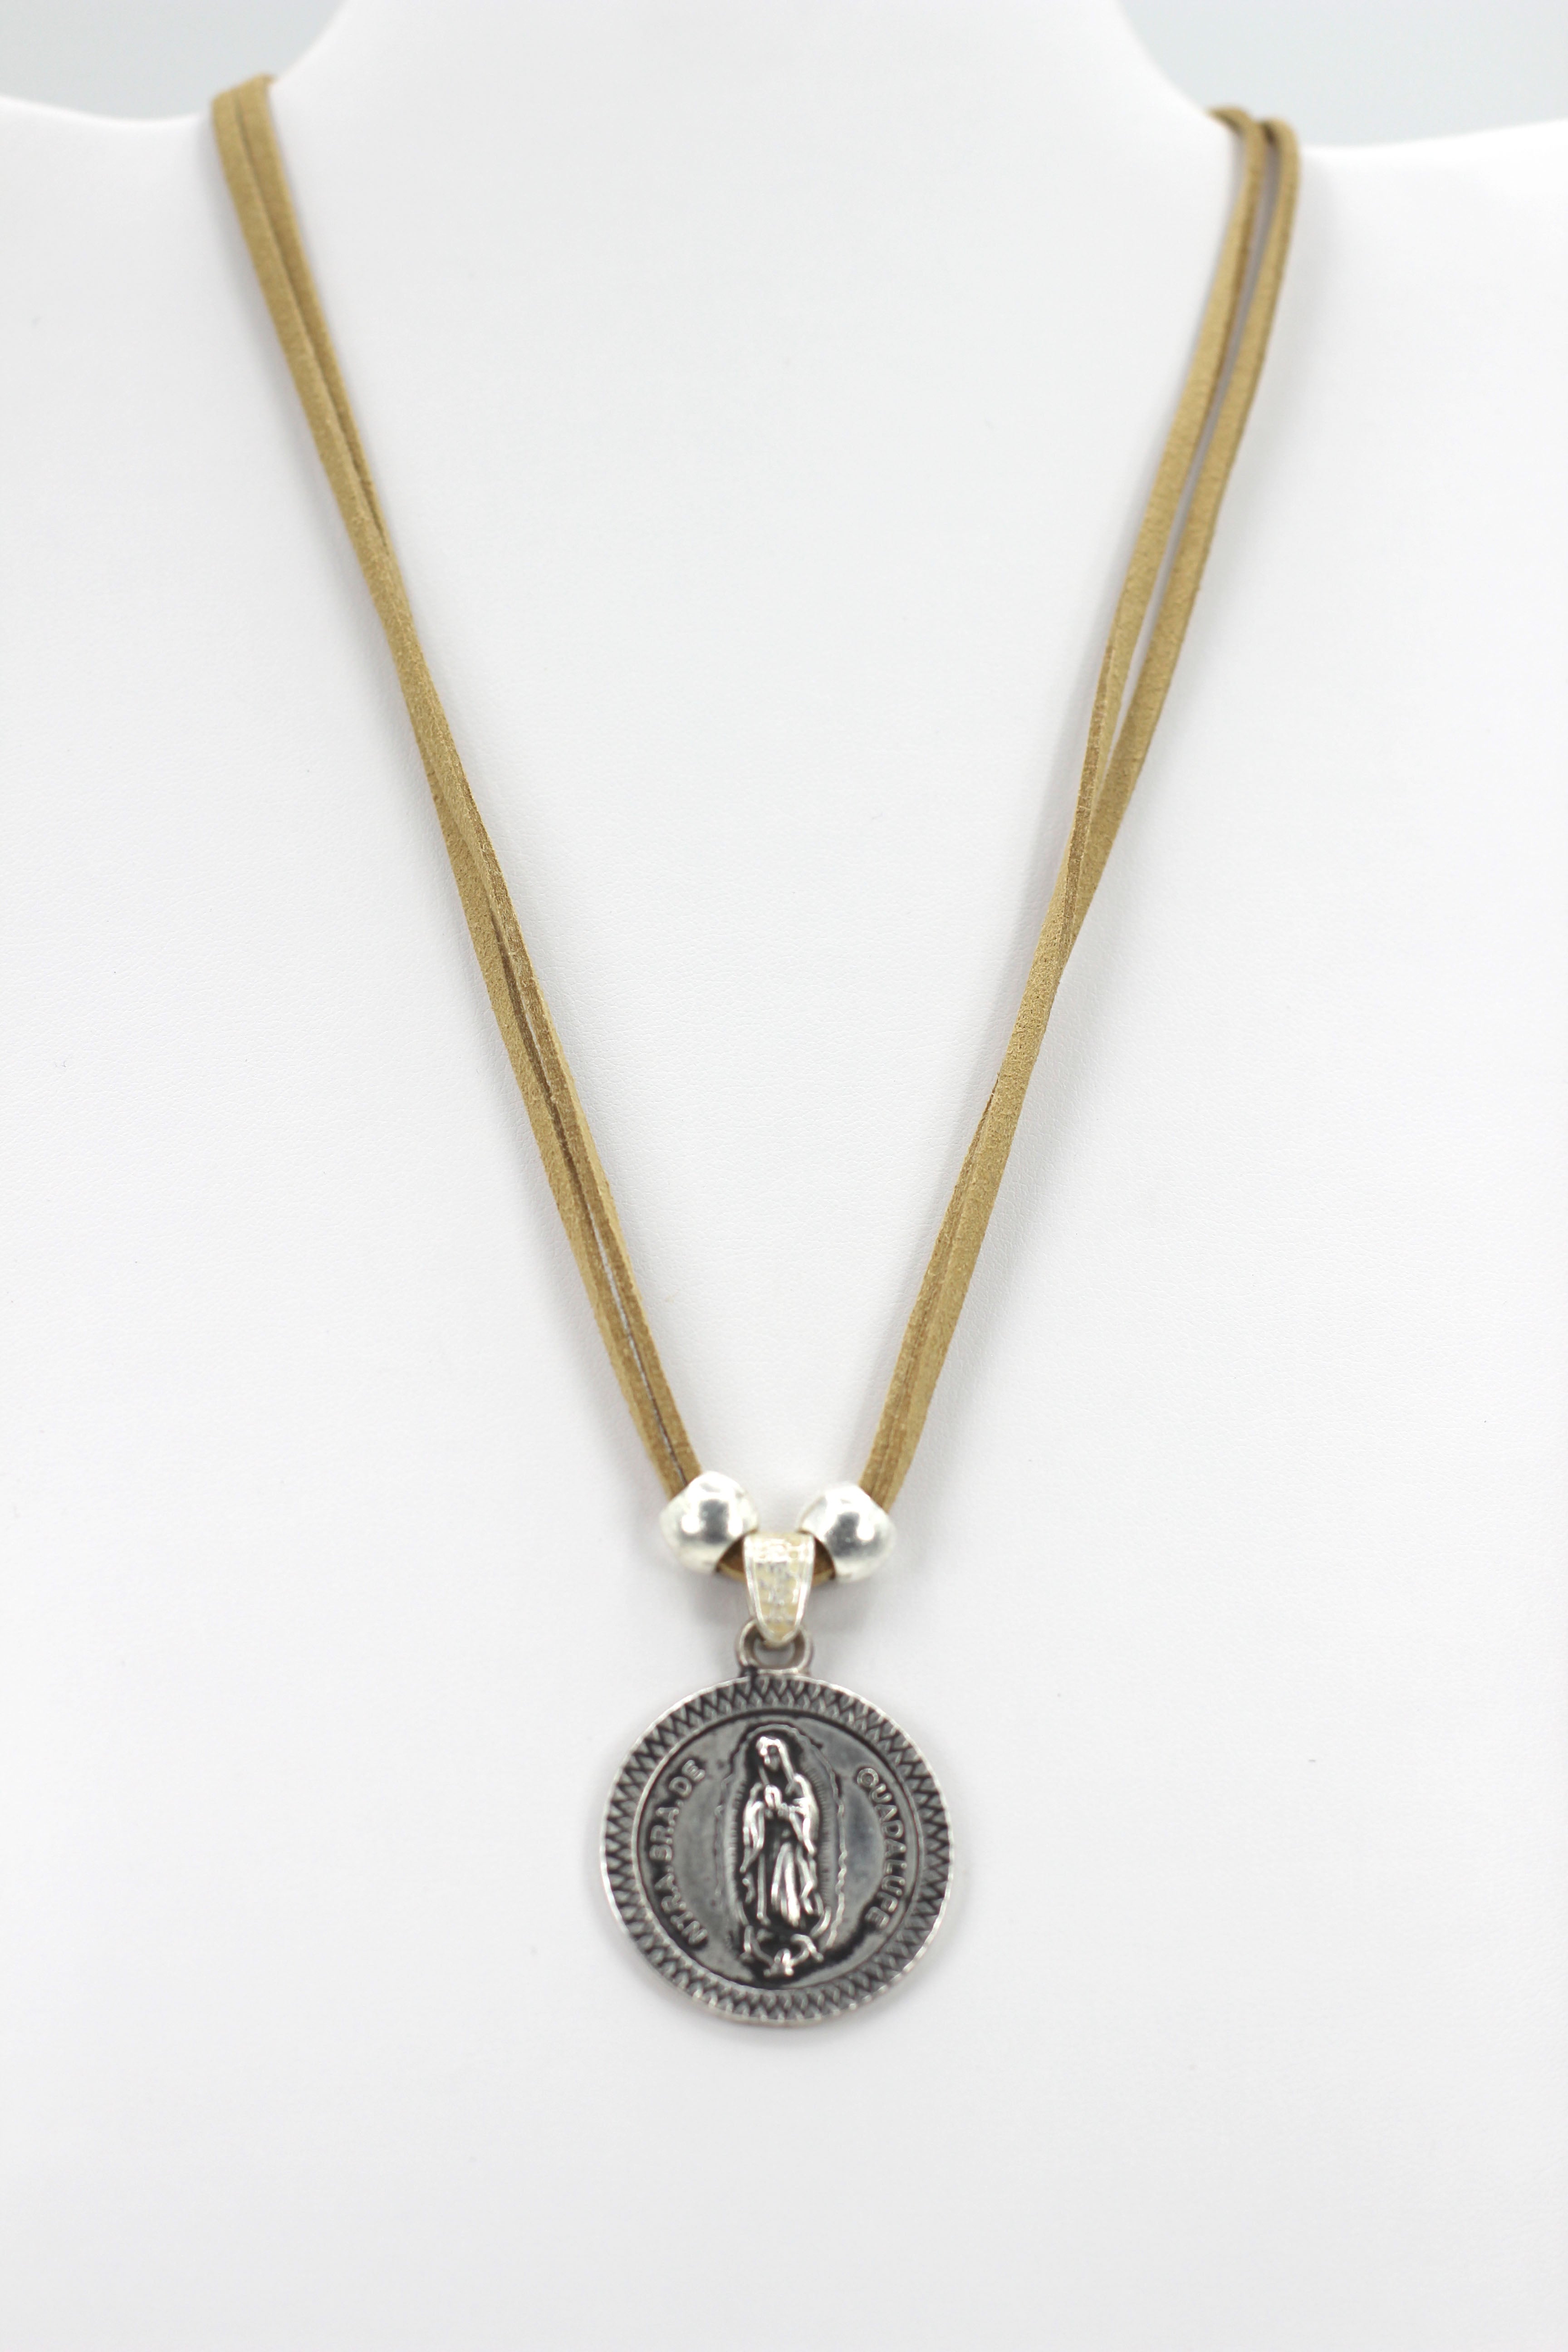 Vintage Medallion Necklace of Our Lady Of Guadalupe - Nuestra Sra de Guadalupe Jewelry with Genuine Leather strap by Graciela's Collection